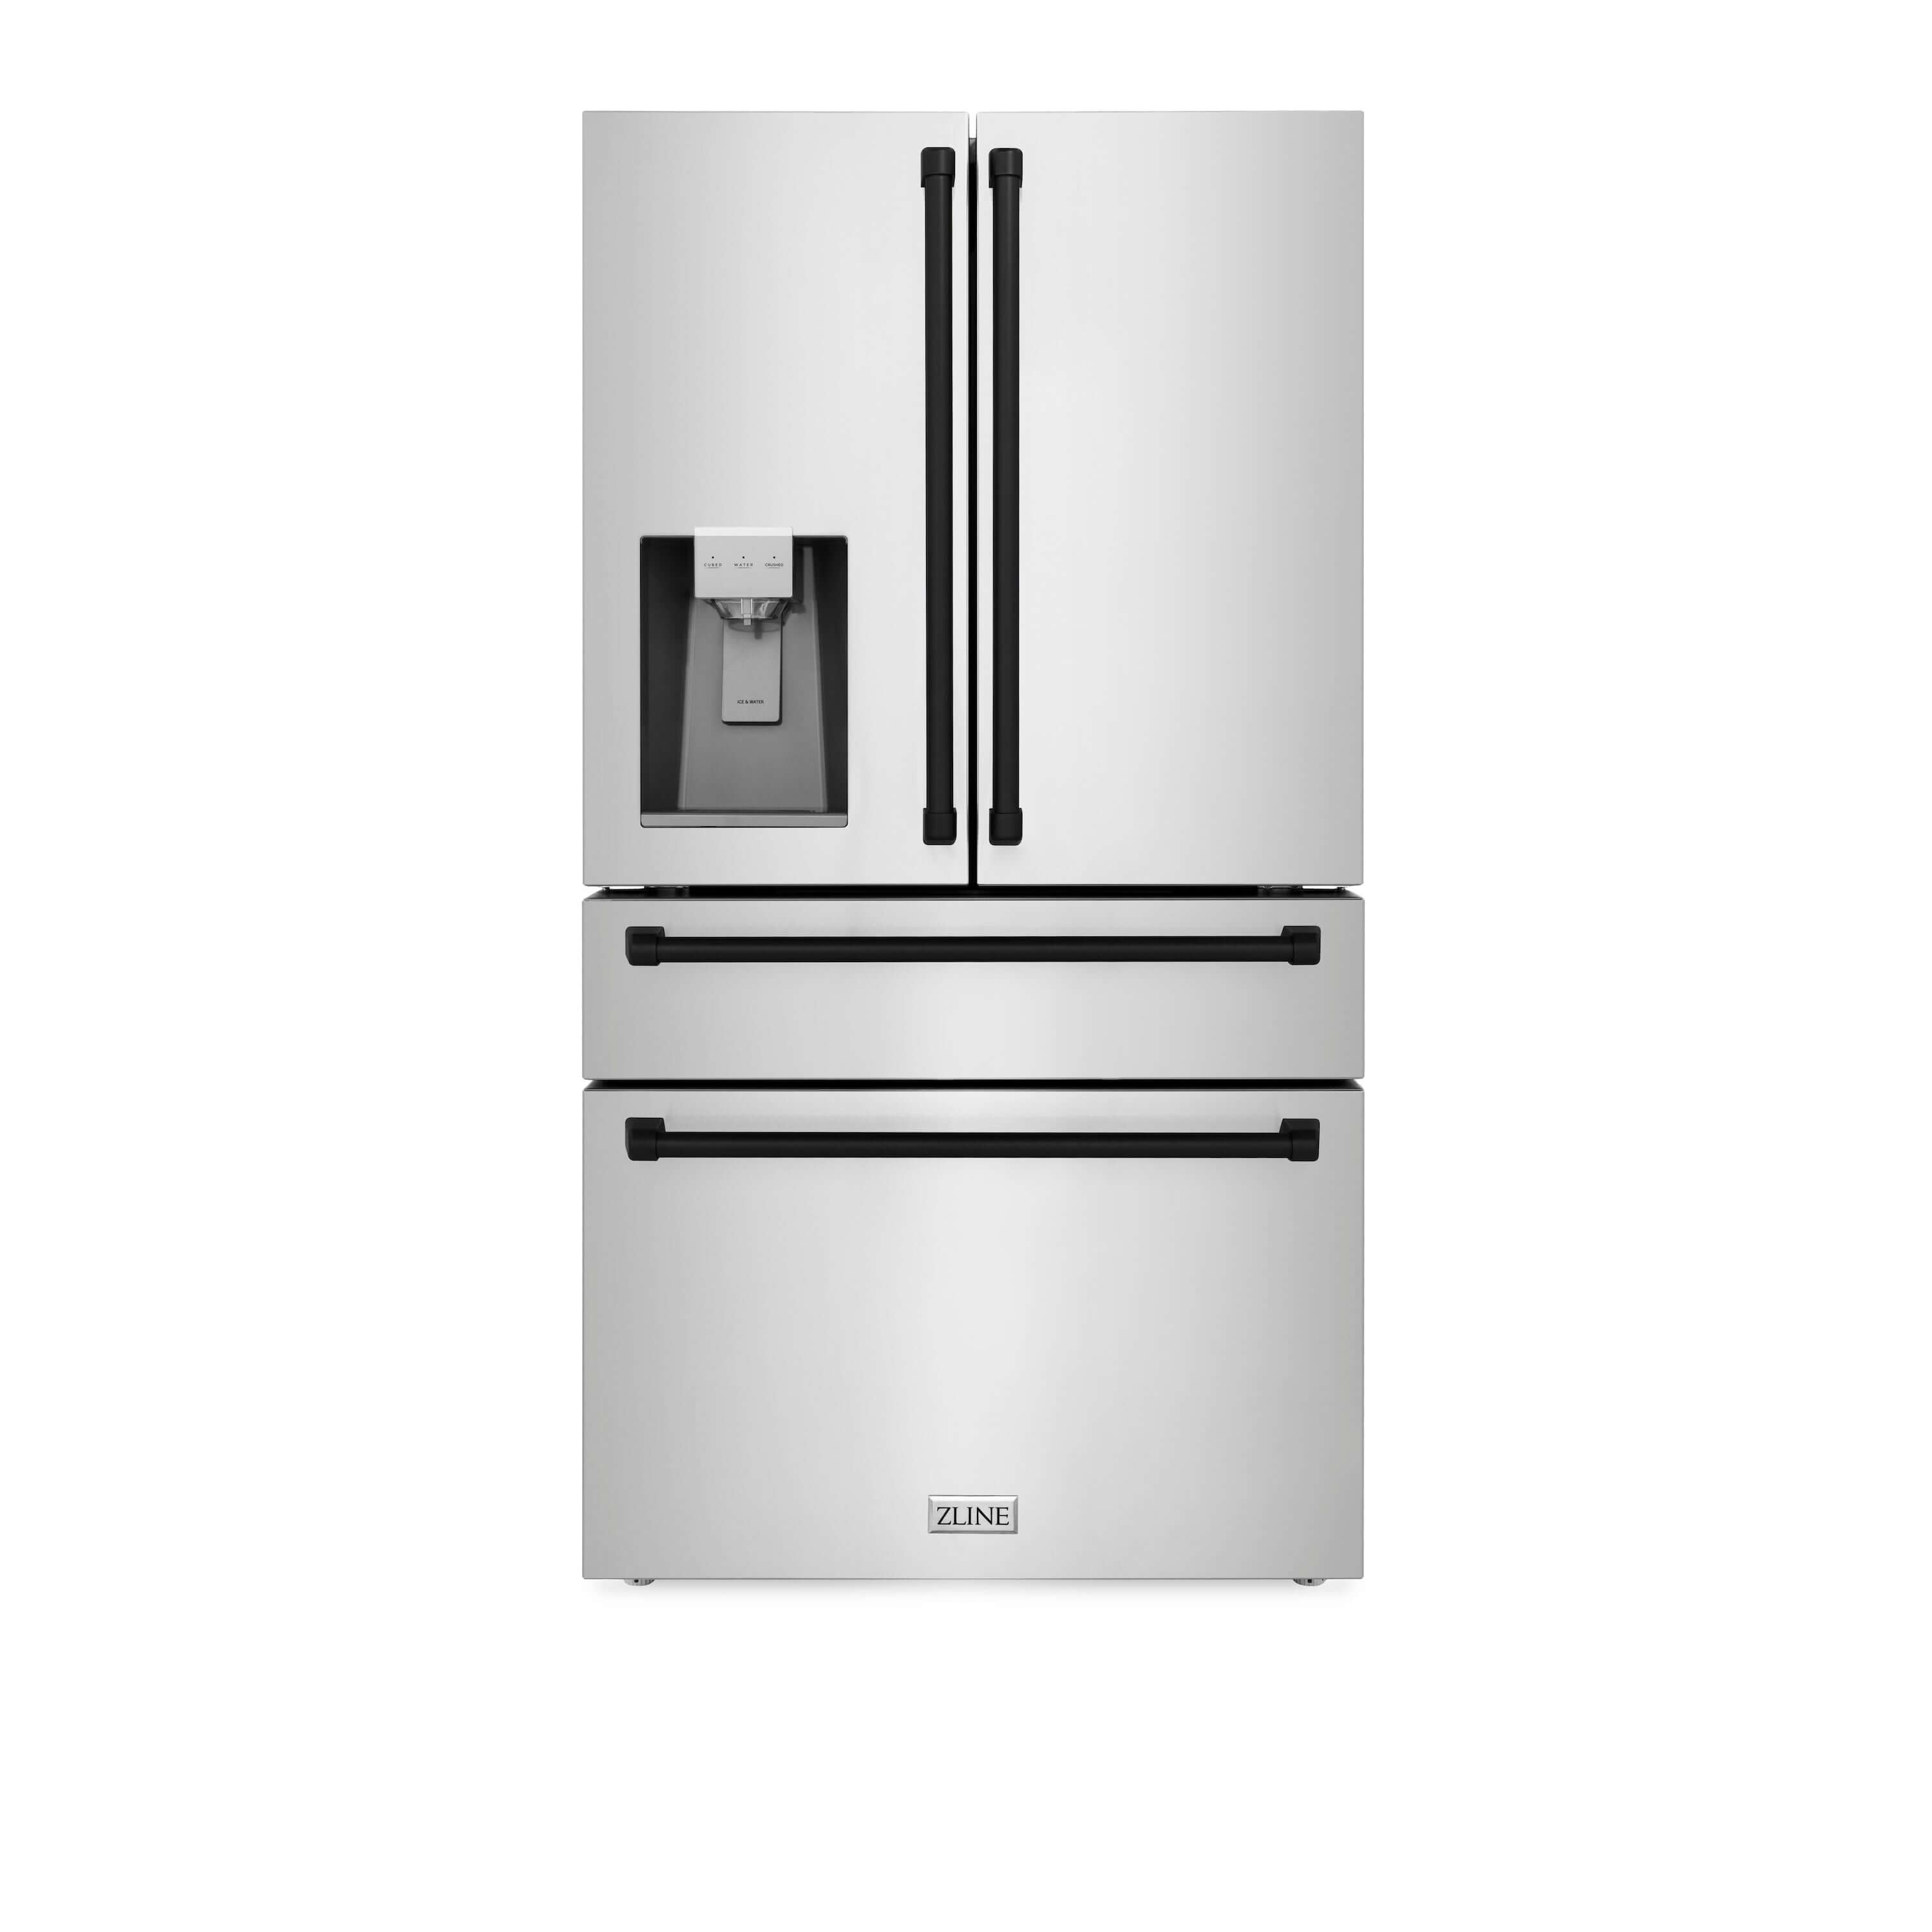 ZLINE Autograph Edition 36 in. 21.6 cu. ft Freestanding French Door Refrigerator with Water Dispenser in Stainless Steel with Matte Black Accents (RFMZ-W-36-MB) front, closed.